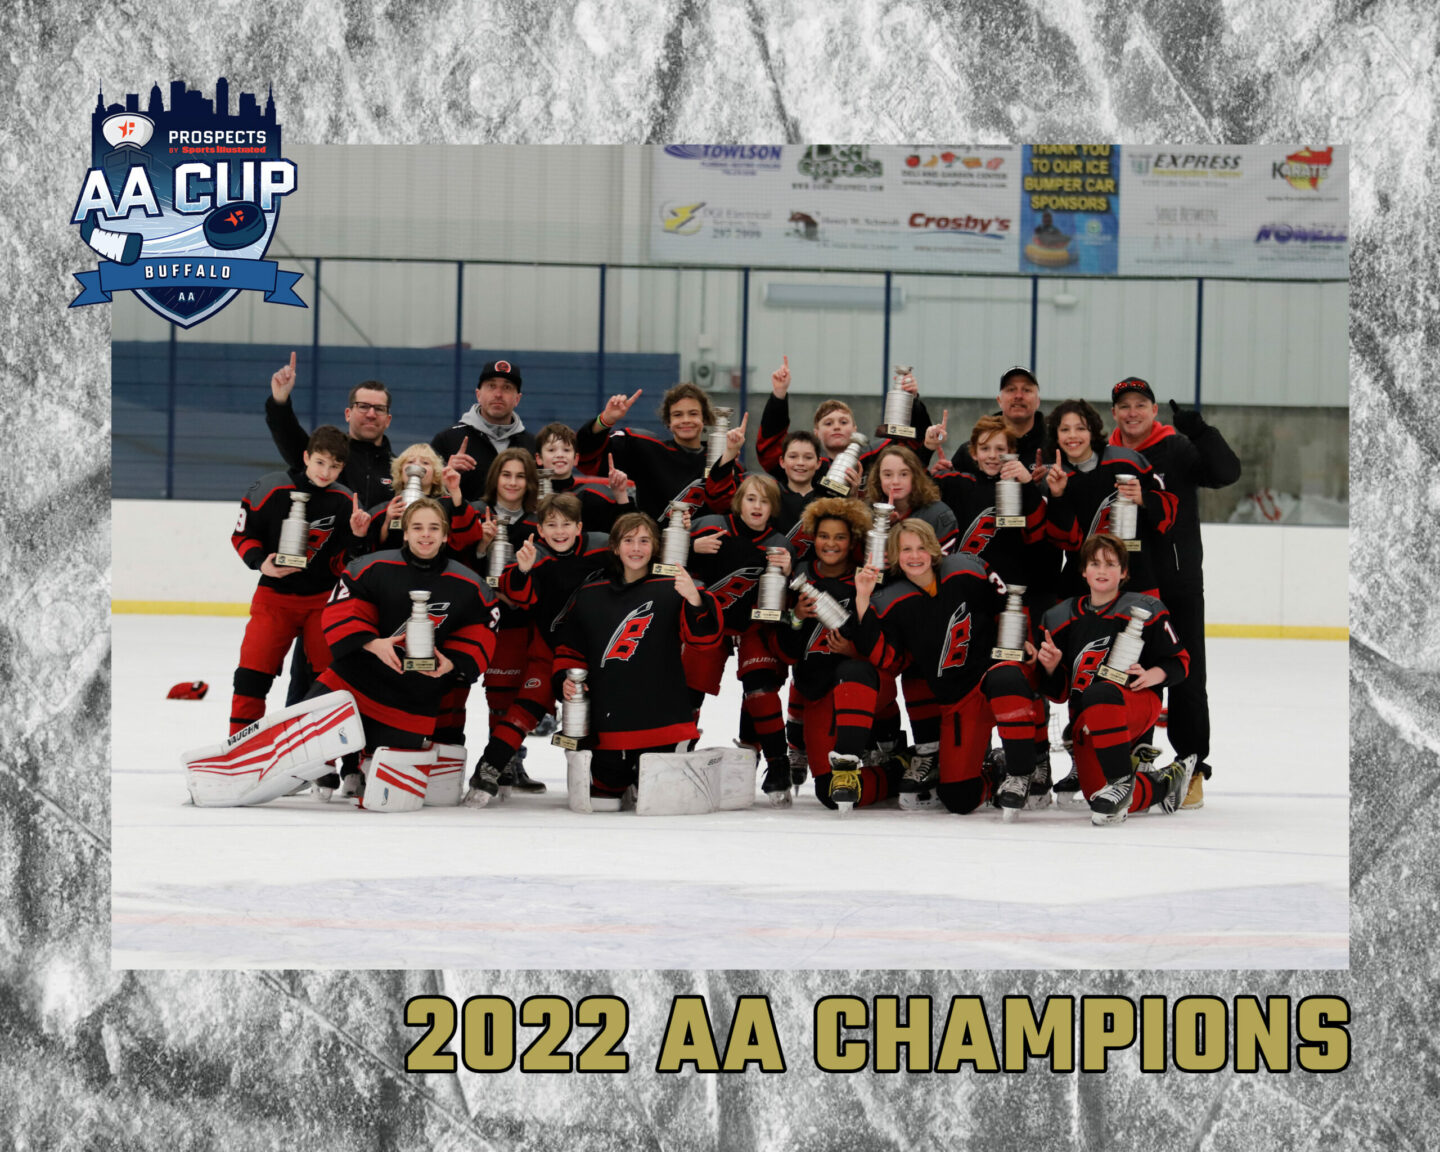 AA CUP Buffalo 2022 Prospects by Sports Illustrated